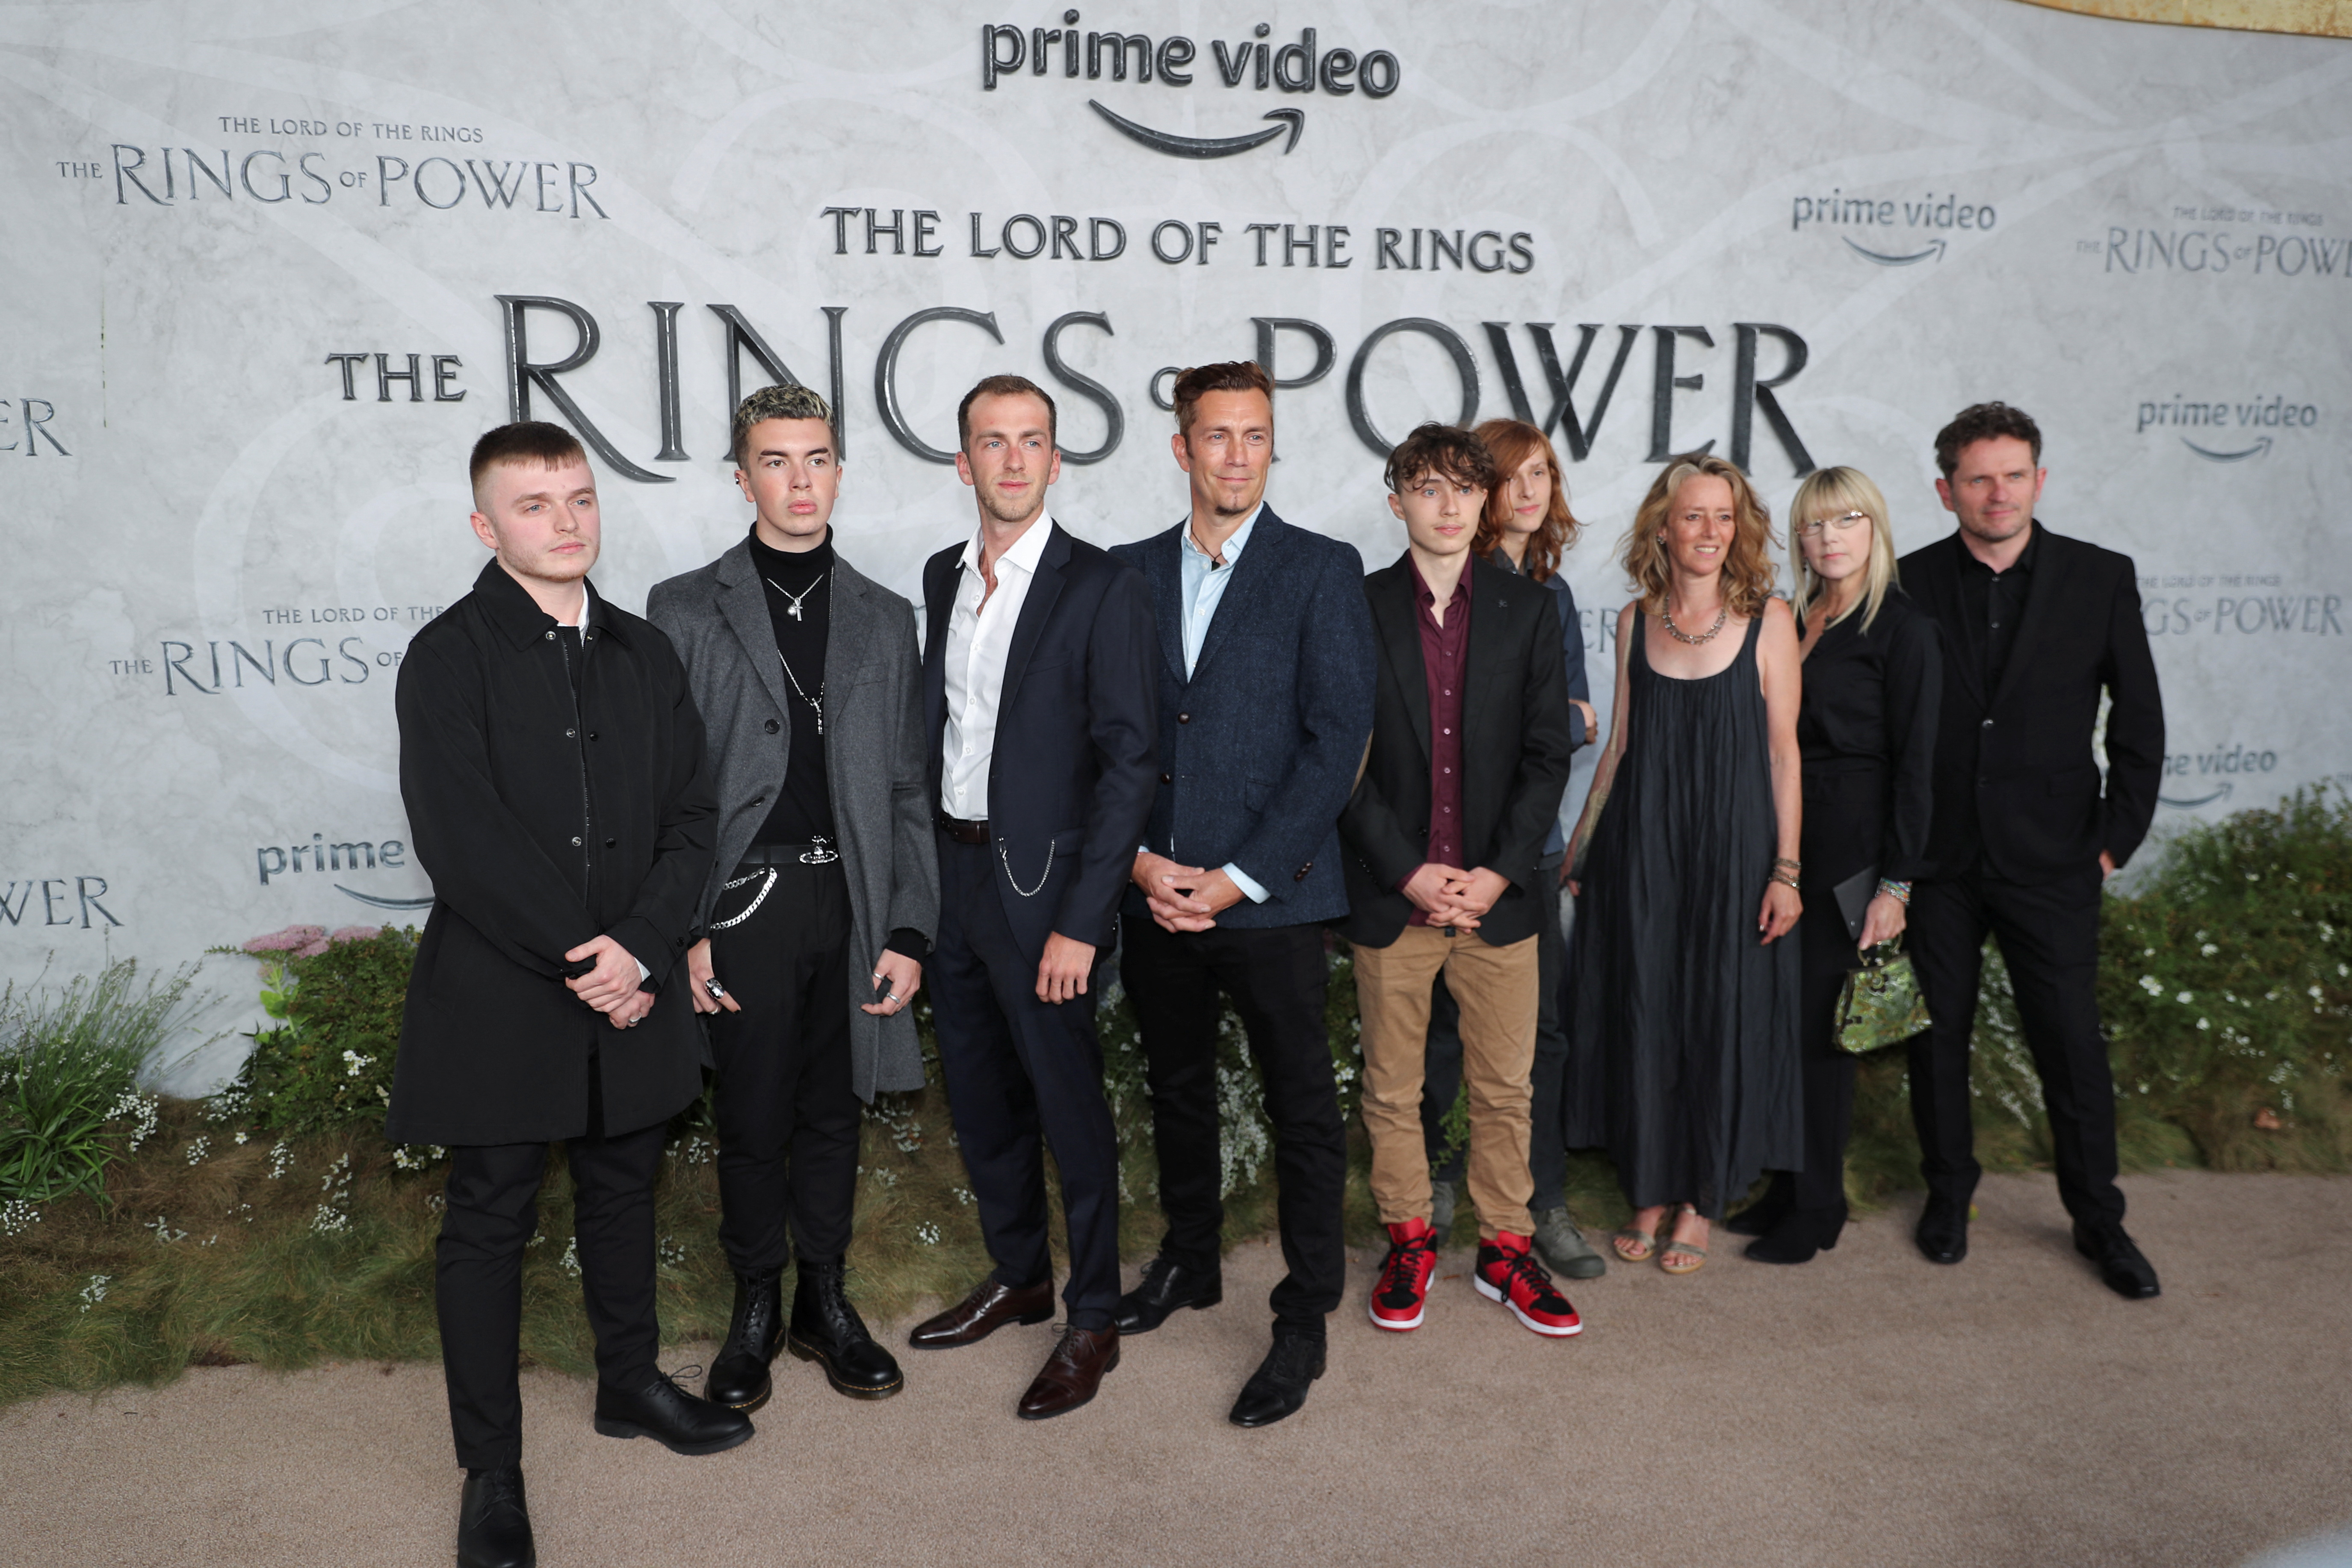 Prime Claims Record High Viewership After THE LORD OF THE RINGS: THE  RINGS OF POWER Premiere